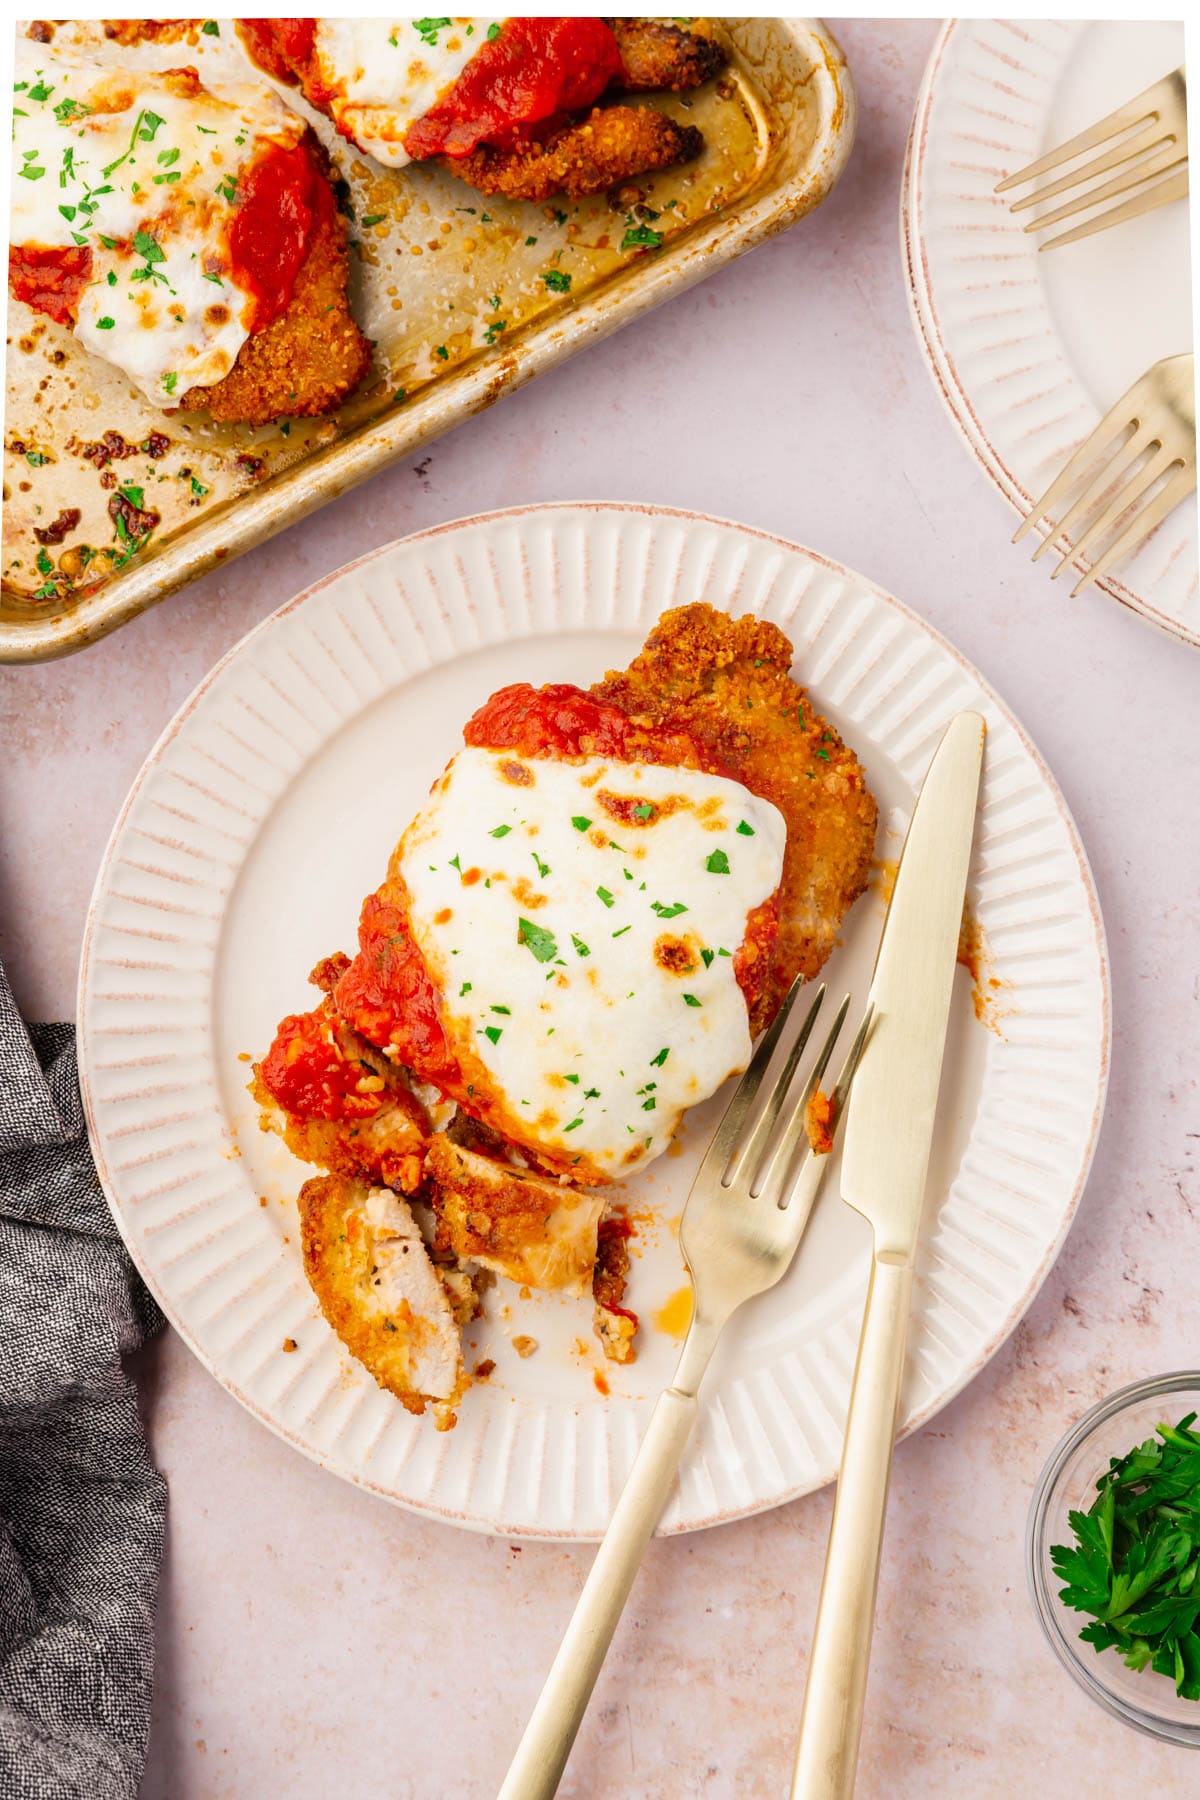 A piece of Gluten-Free Chicken Parmesan on a plate with a fork and knife.